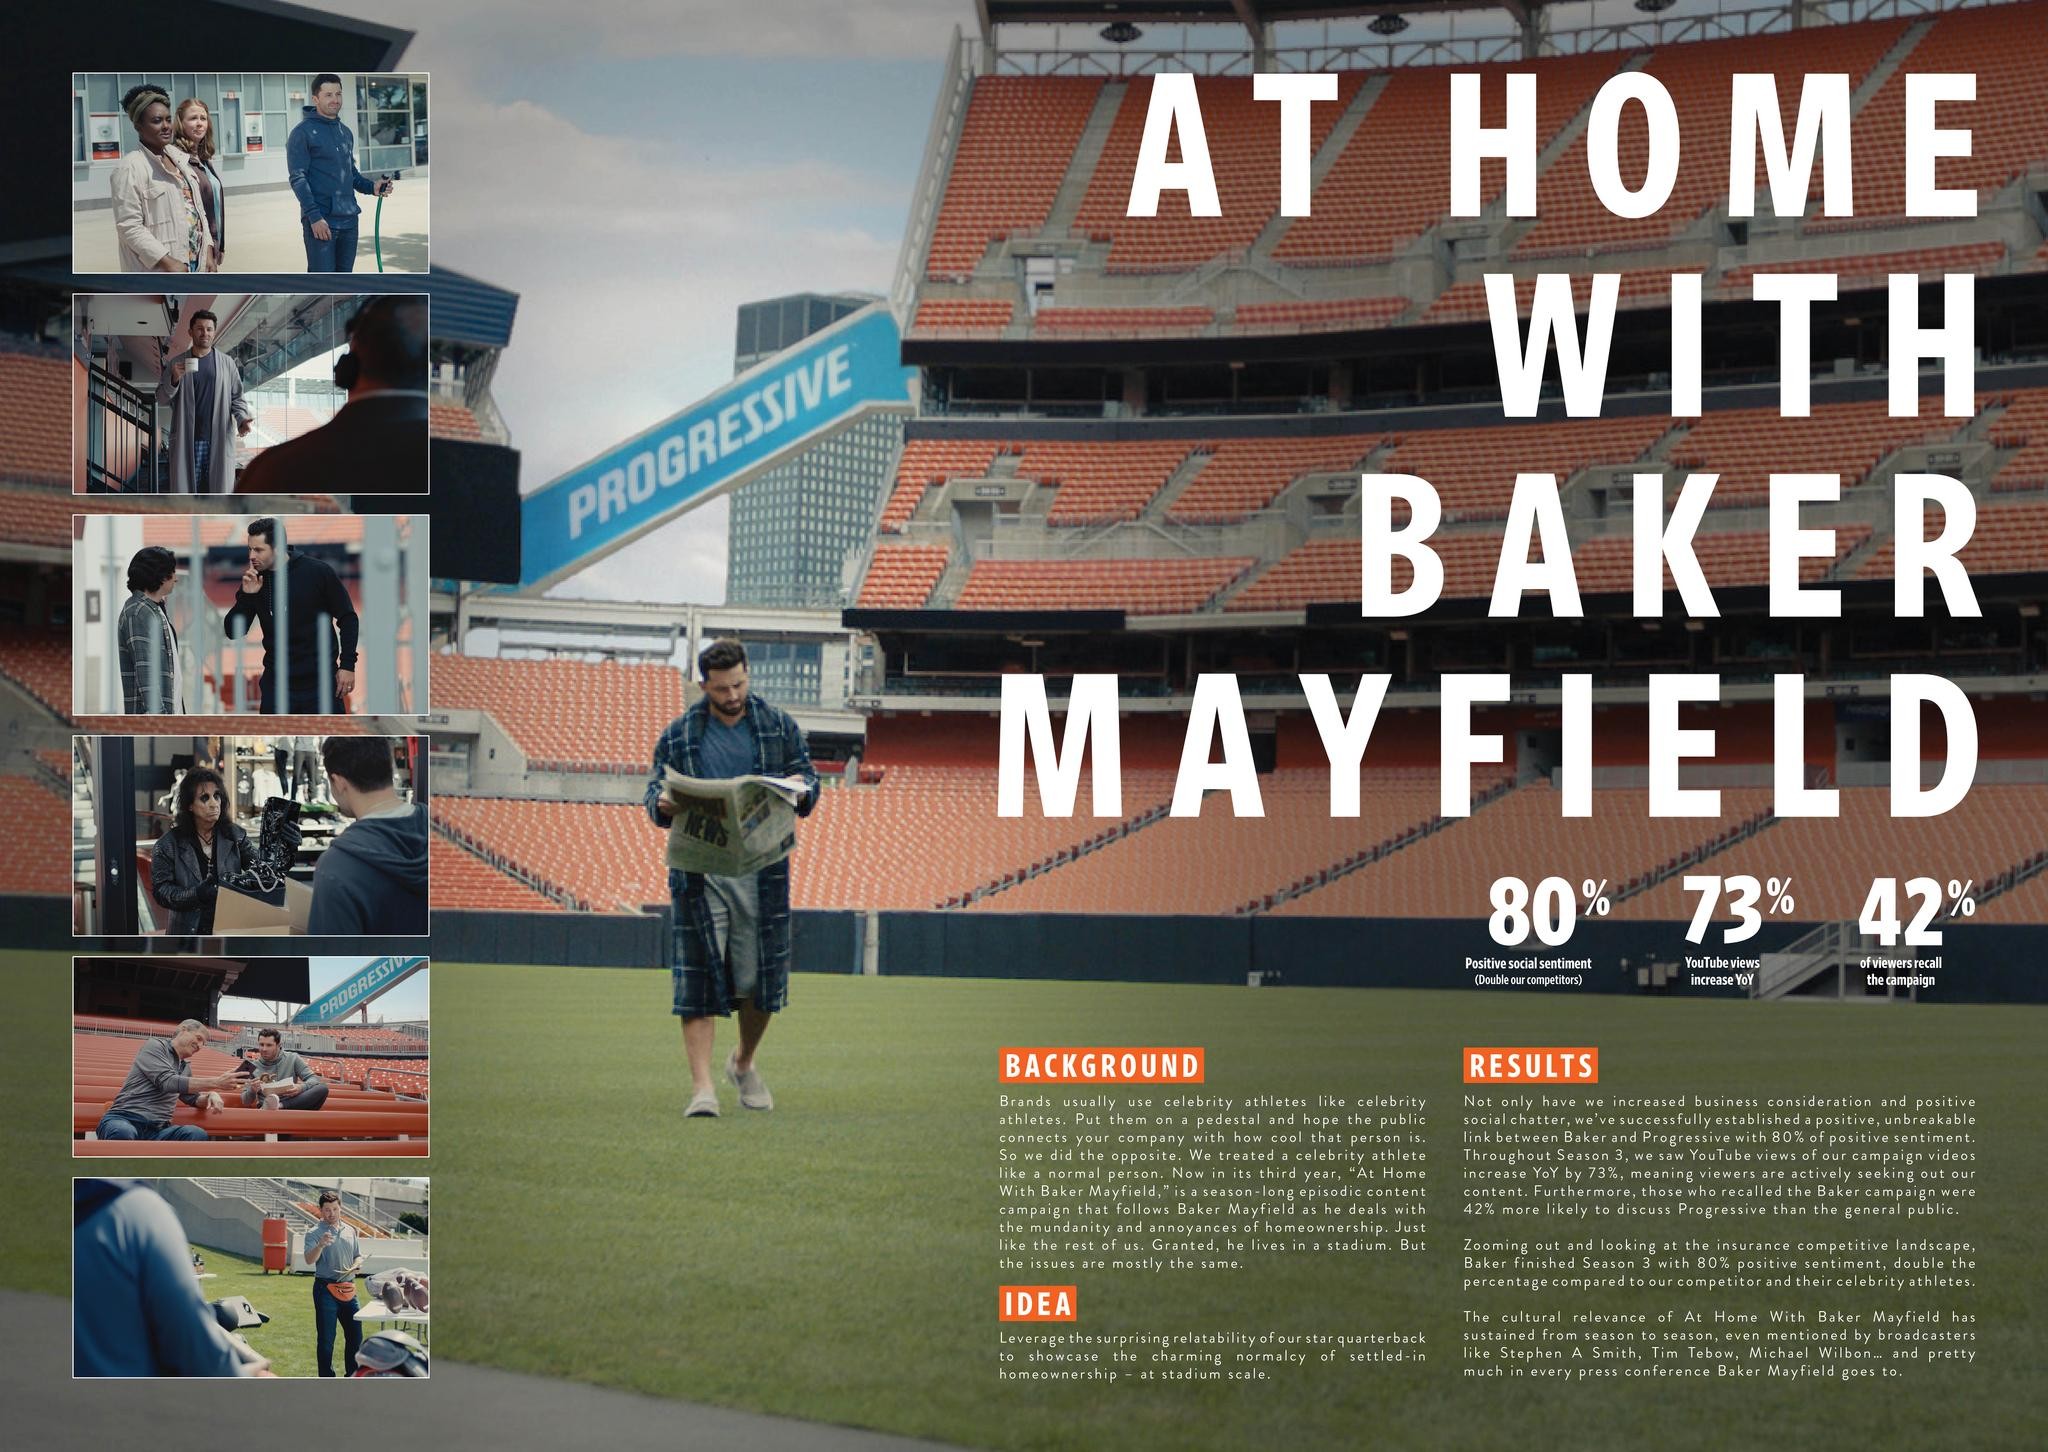 At Home with Baker Mayfield